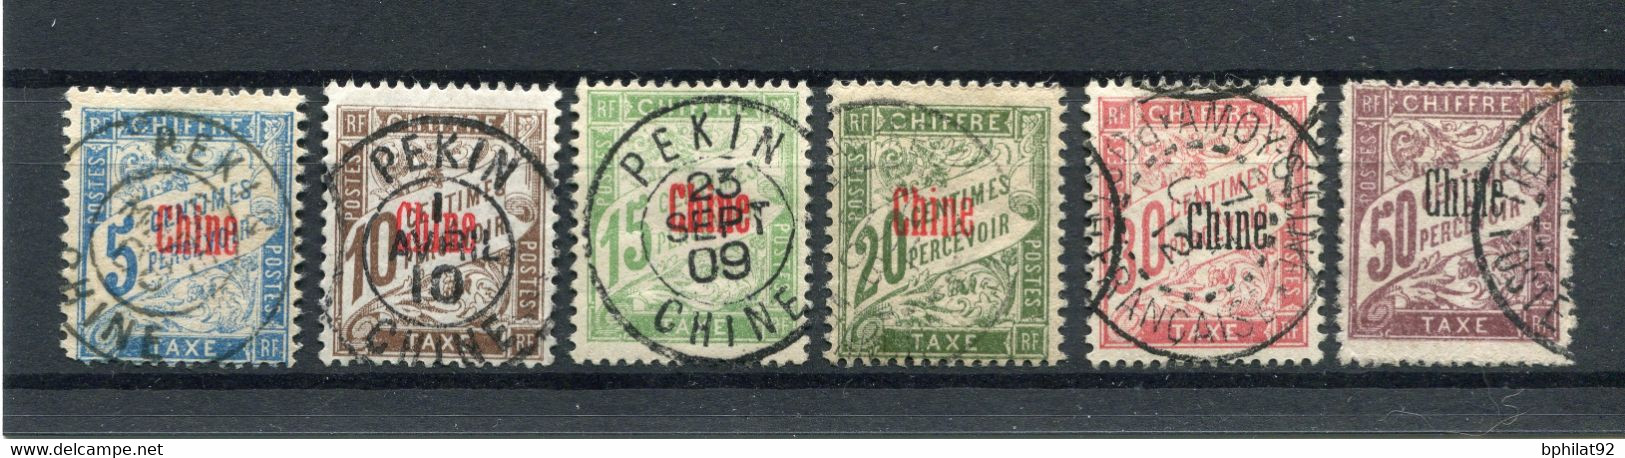 !!! CHINE, SERIE DE TAXES N°1/6 OBLITERATIONS SELECTIONNES - Timbres-taxe